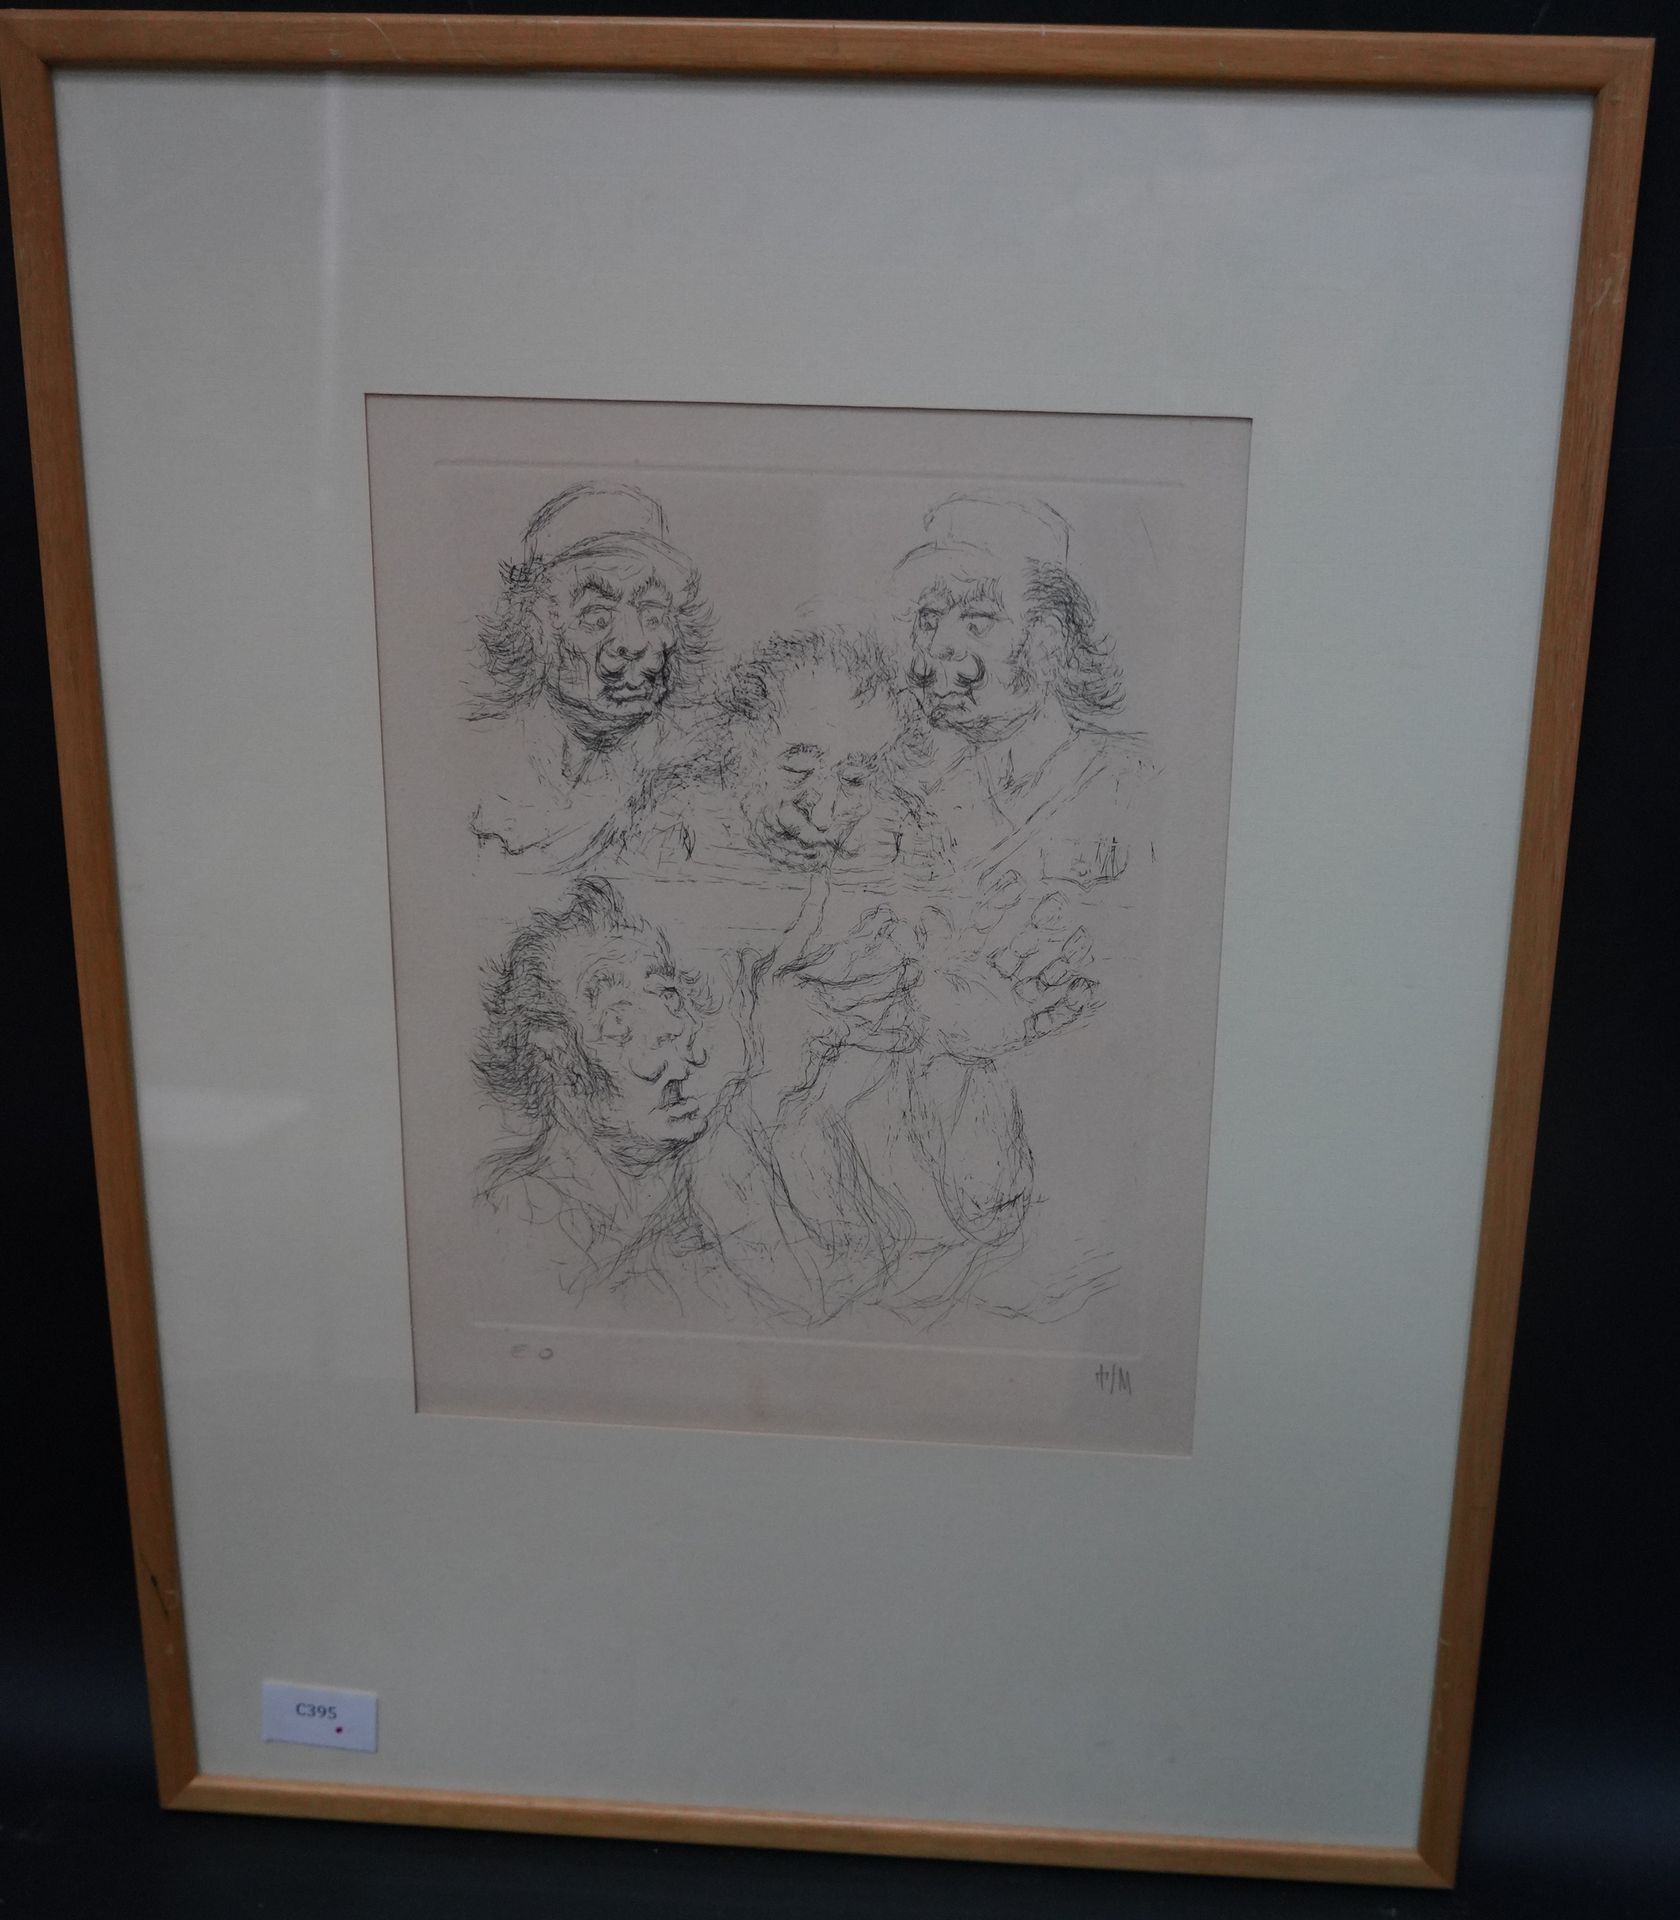 Louis MITELBERG dit TIM (1919-2002) Dali-Gaulle
Drypoint, signed lower right, ma&hellip;